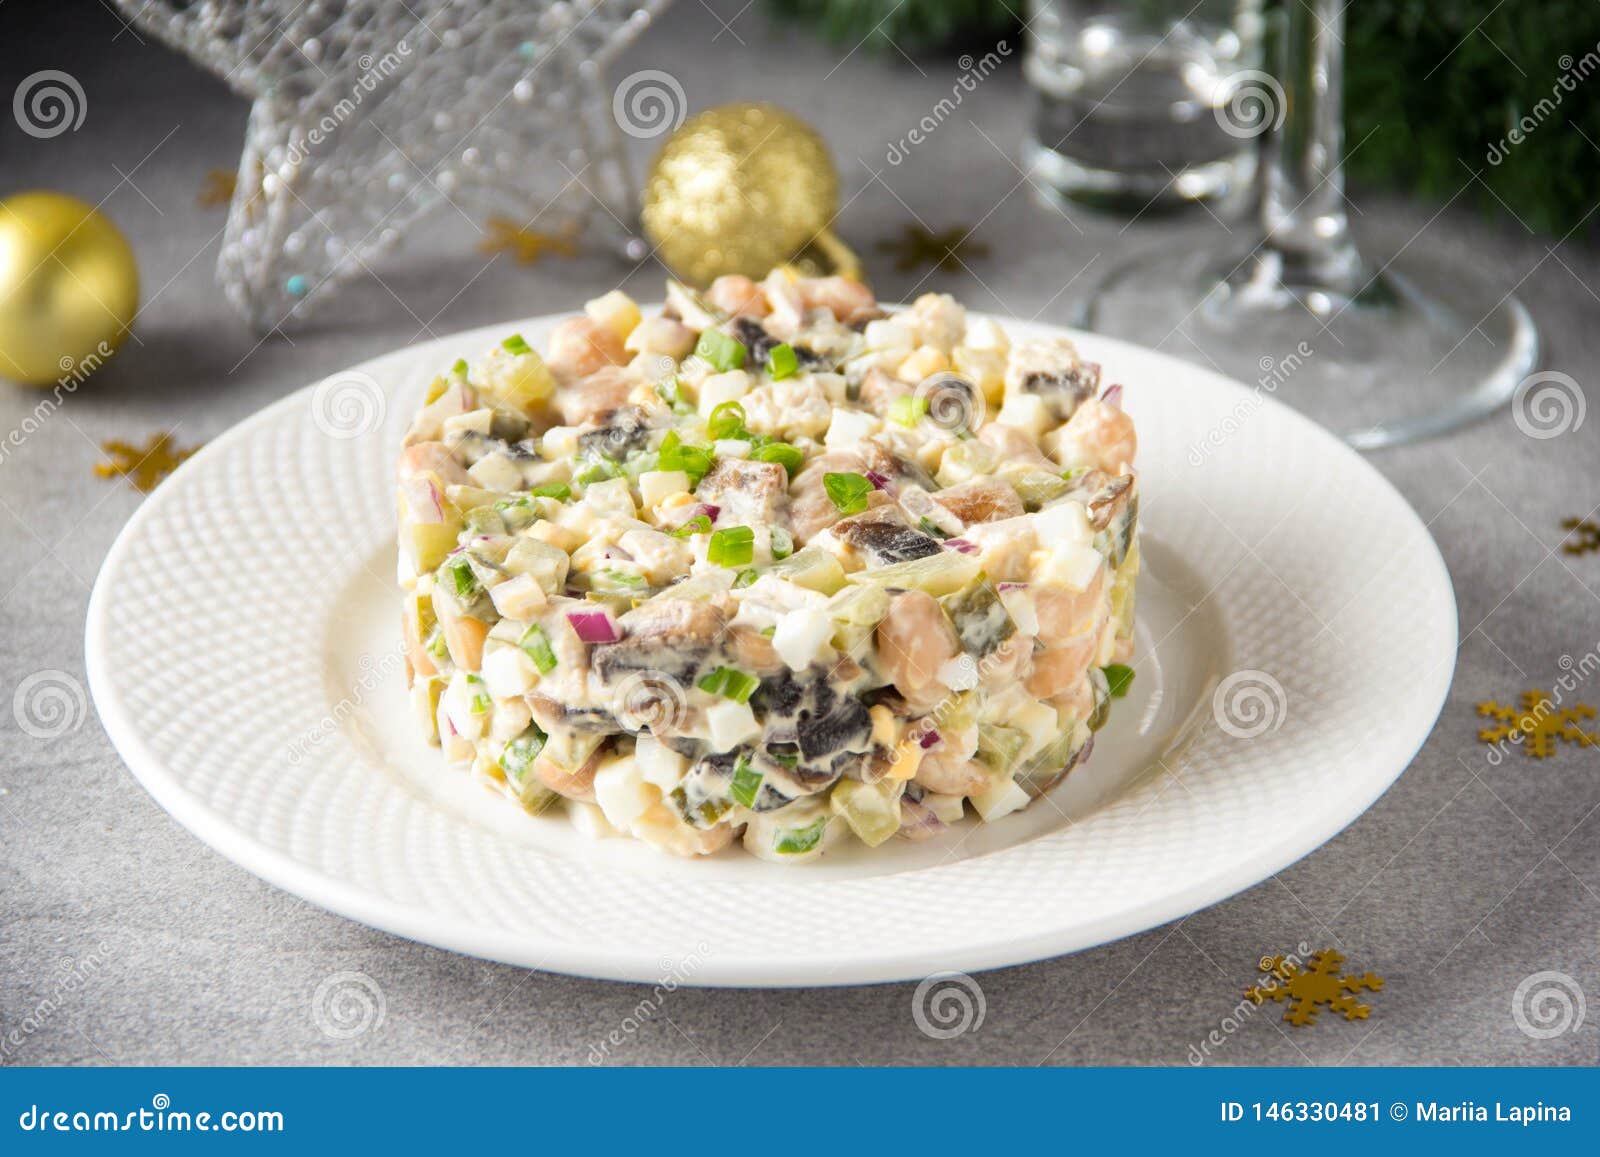 Russian Salad with Meat, Potatoes, Egg, Cucumber, Onion, Mushrooms and ...